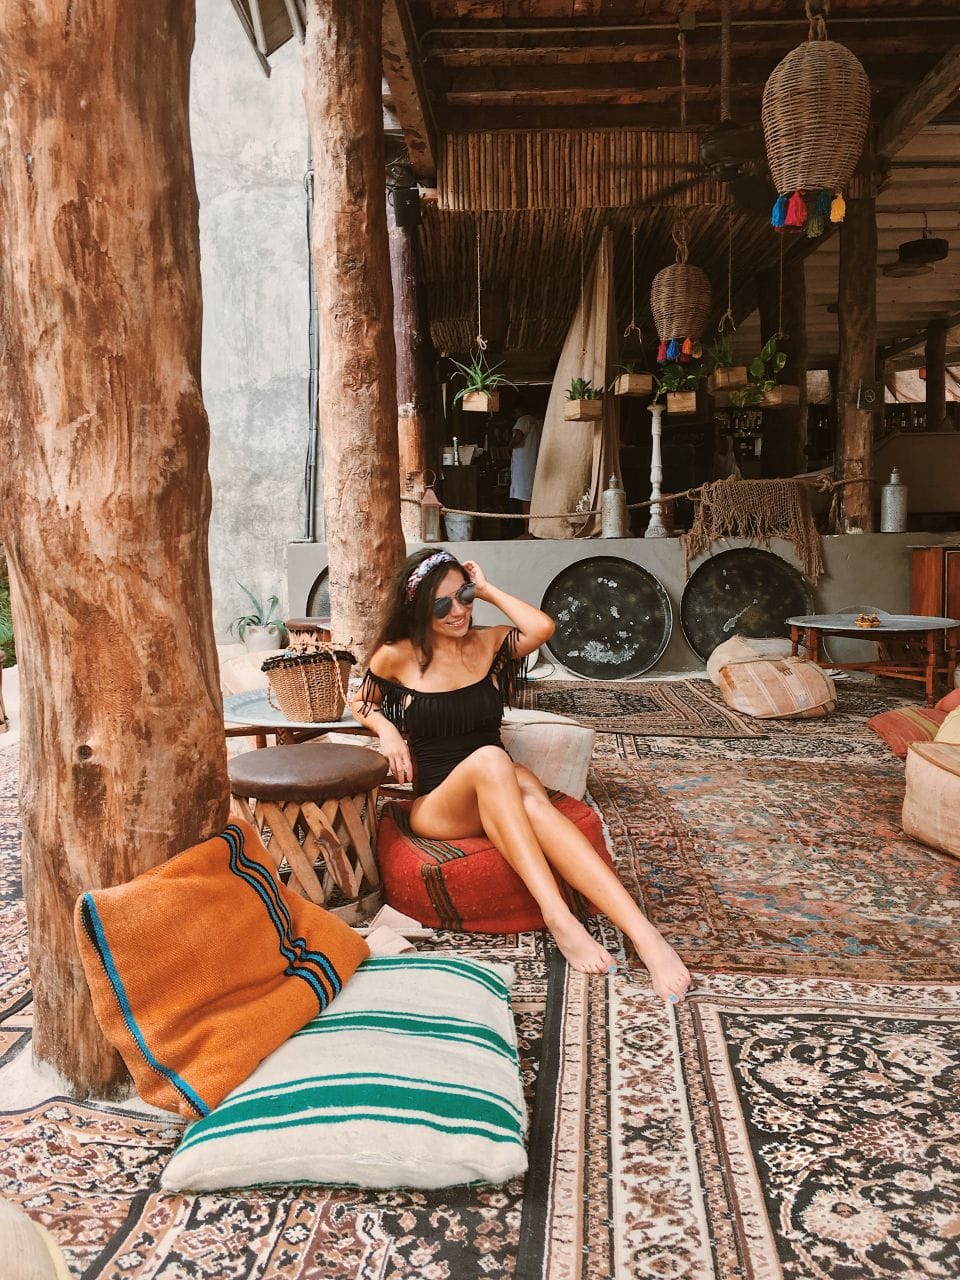 Where to stay in Tulum: Nomade Tulum